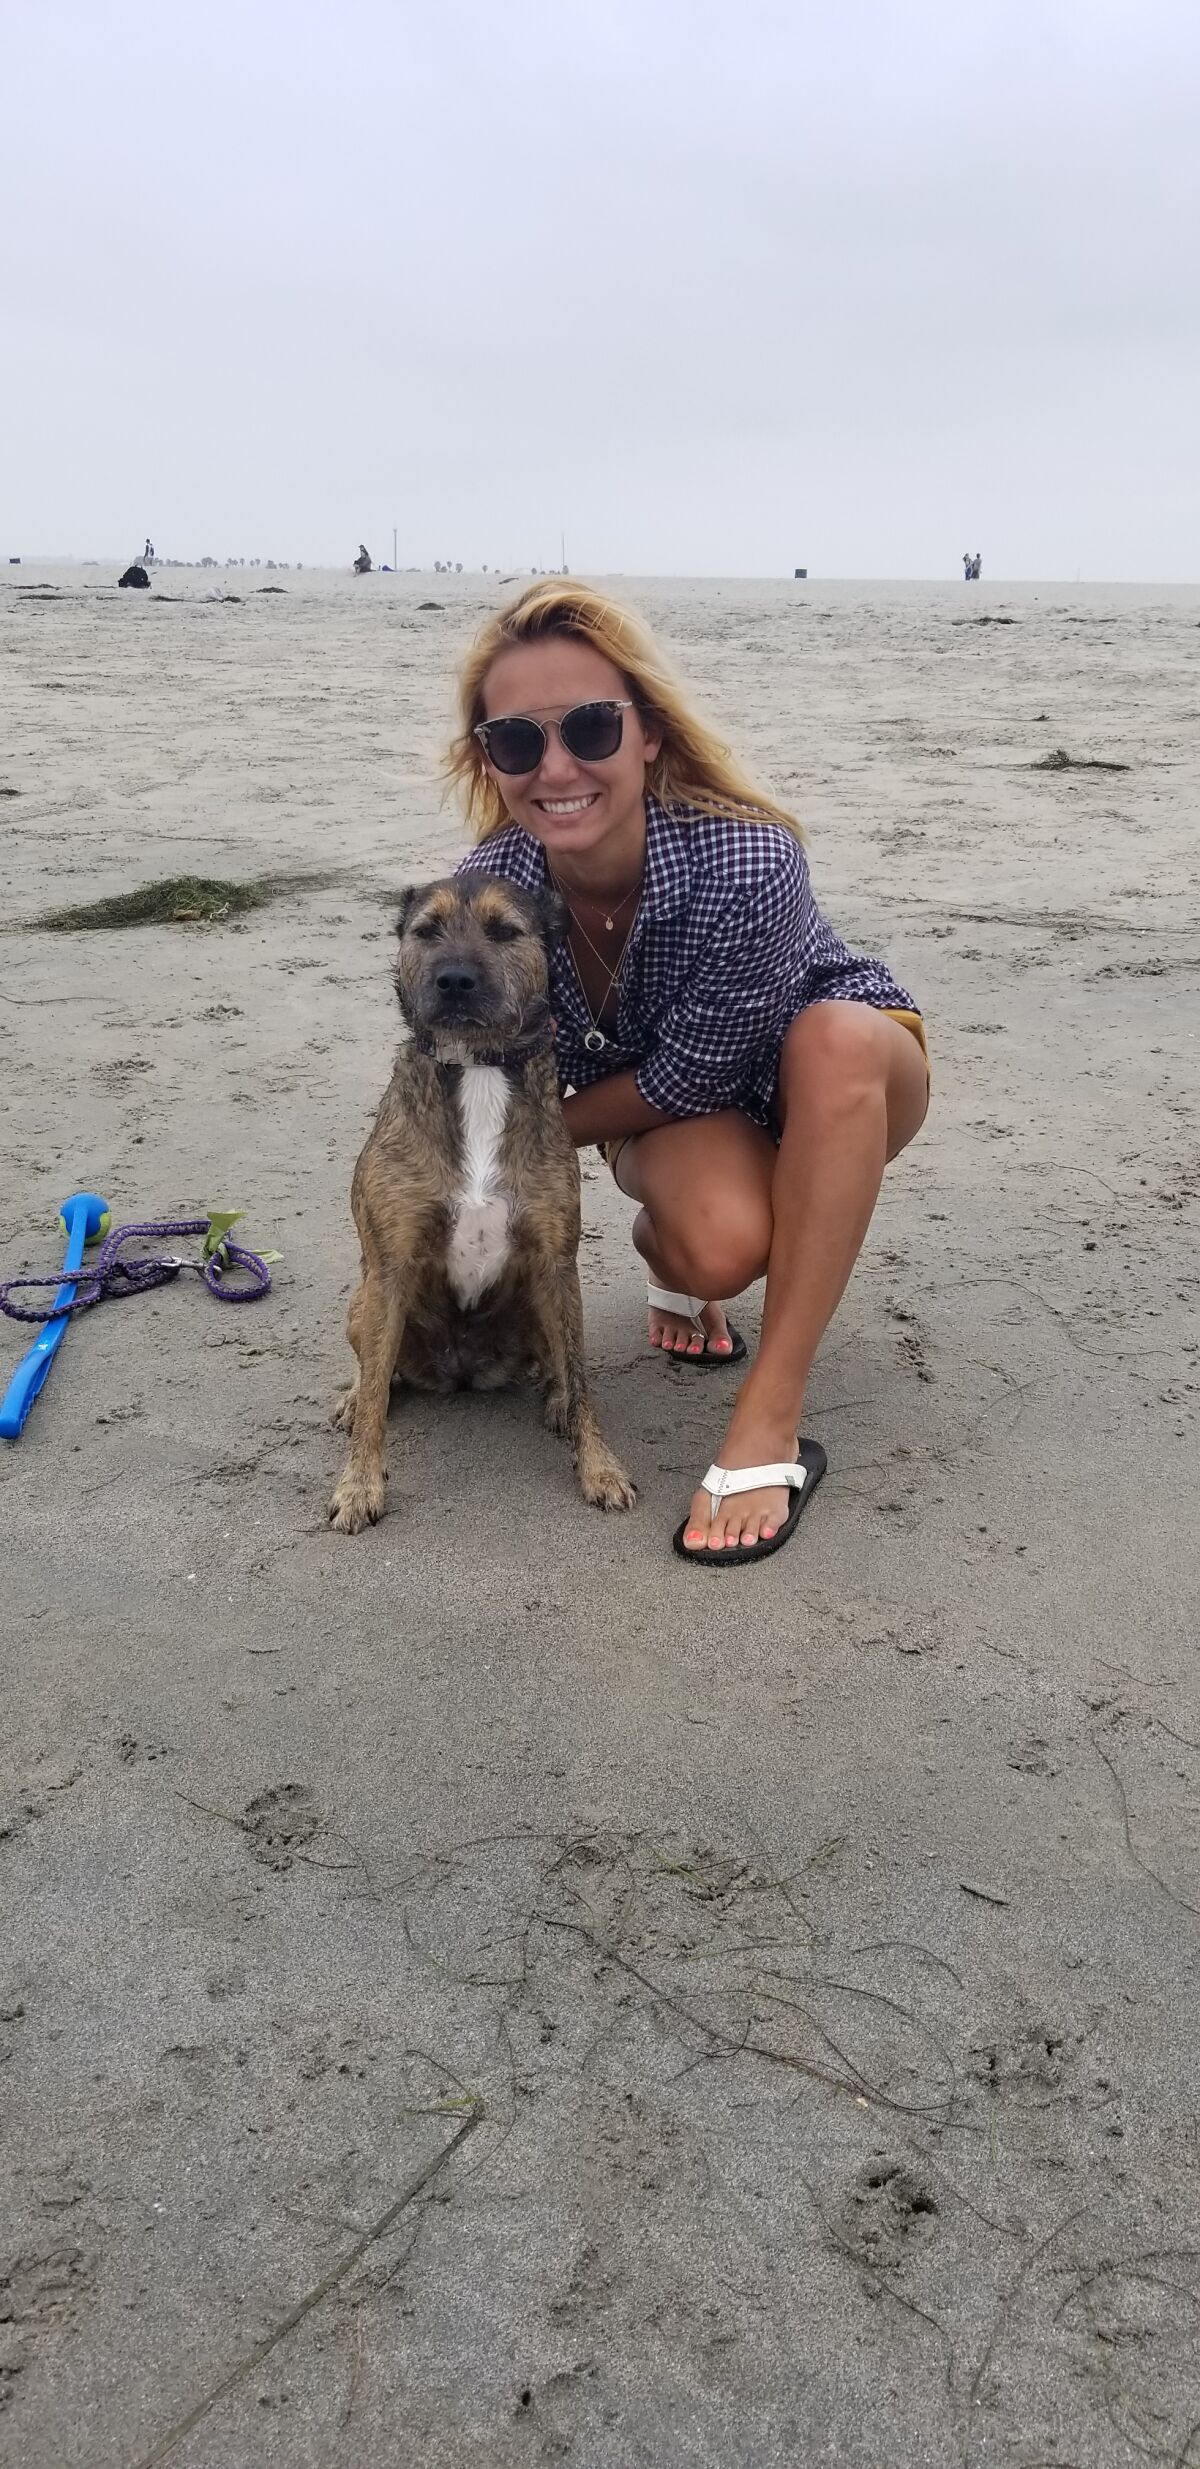 Joanna Sutton spends an afternoon with her dog Kona at Dog Beach in Ocean Beach.